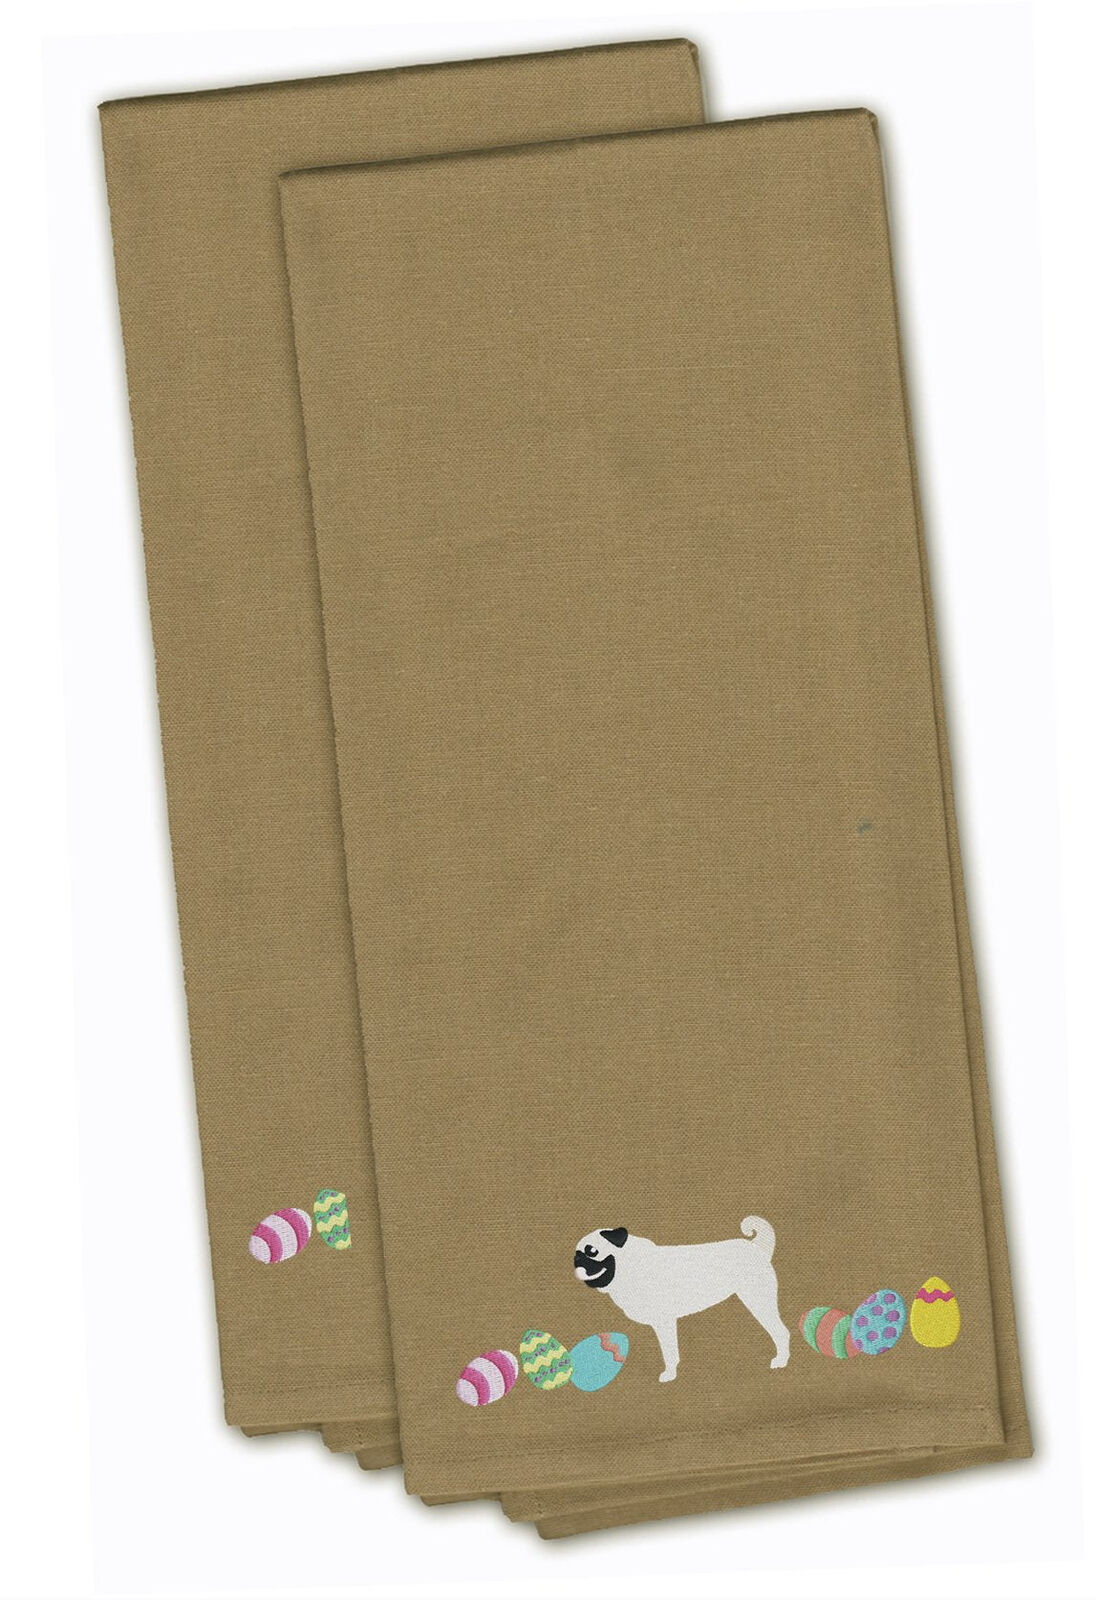 Pug Easter Eggs Tan Embroidered Towel Set of 2 CK1675TNTWE